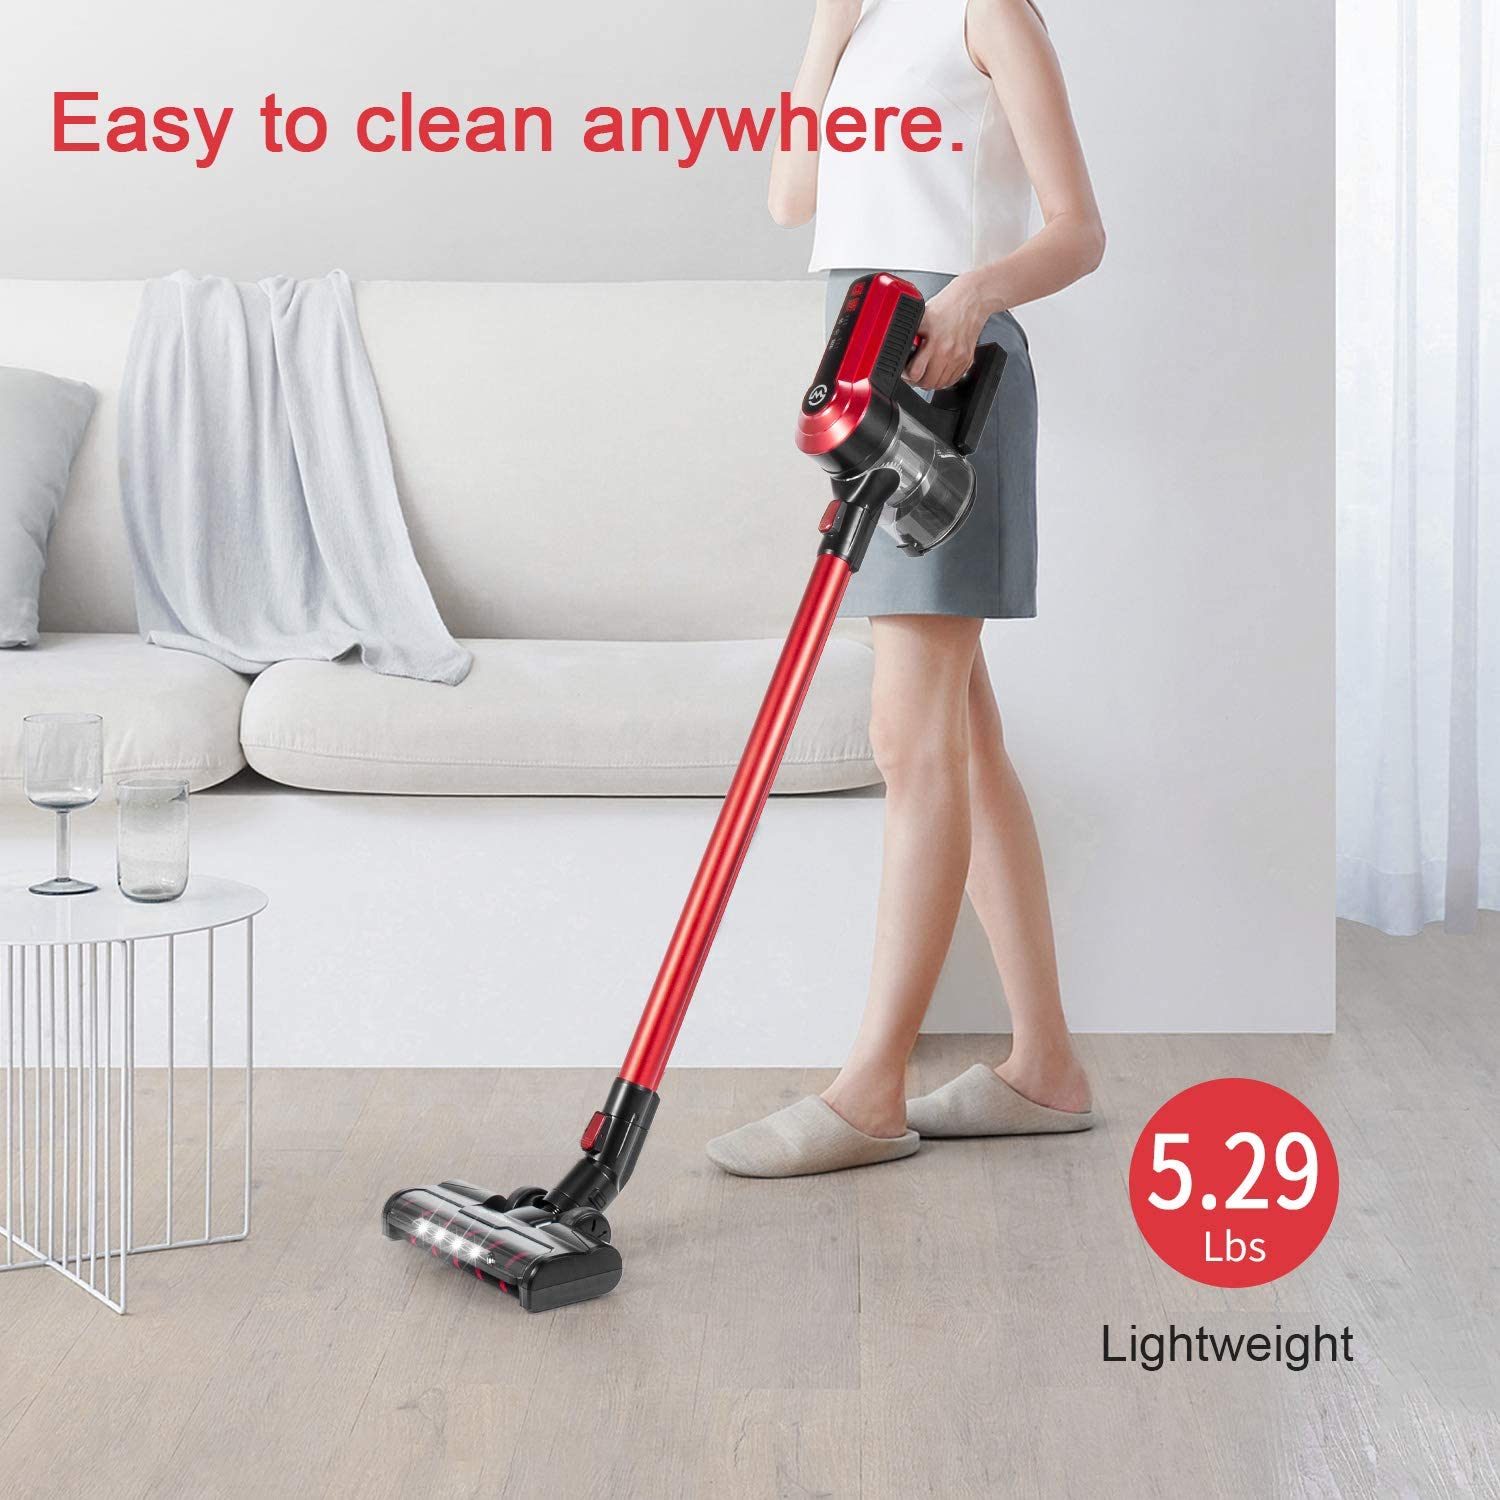 Moosoo Cordless Stick Vacuum Cleaners, 23Kpa Suction, Rich Accessories for Hardwood Floor Carpet Pet Hair, Size: M8Pro